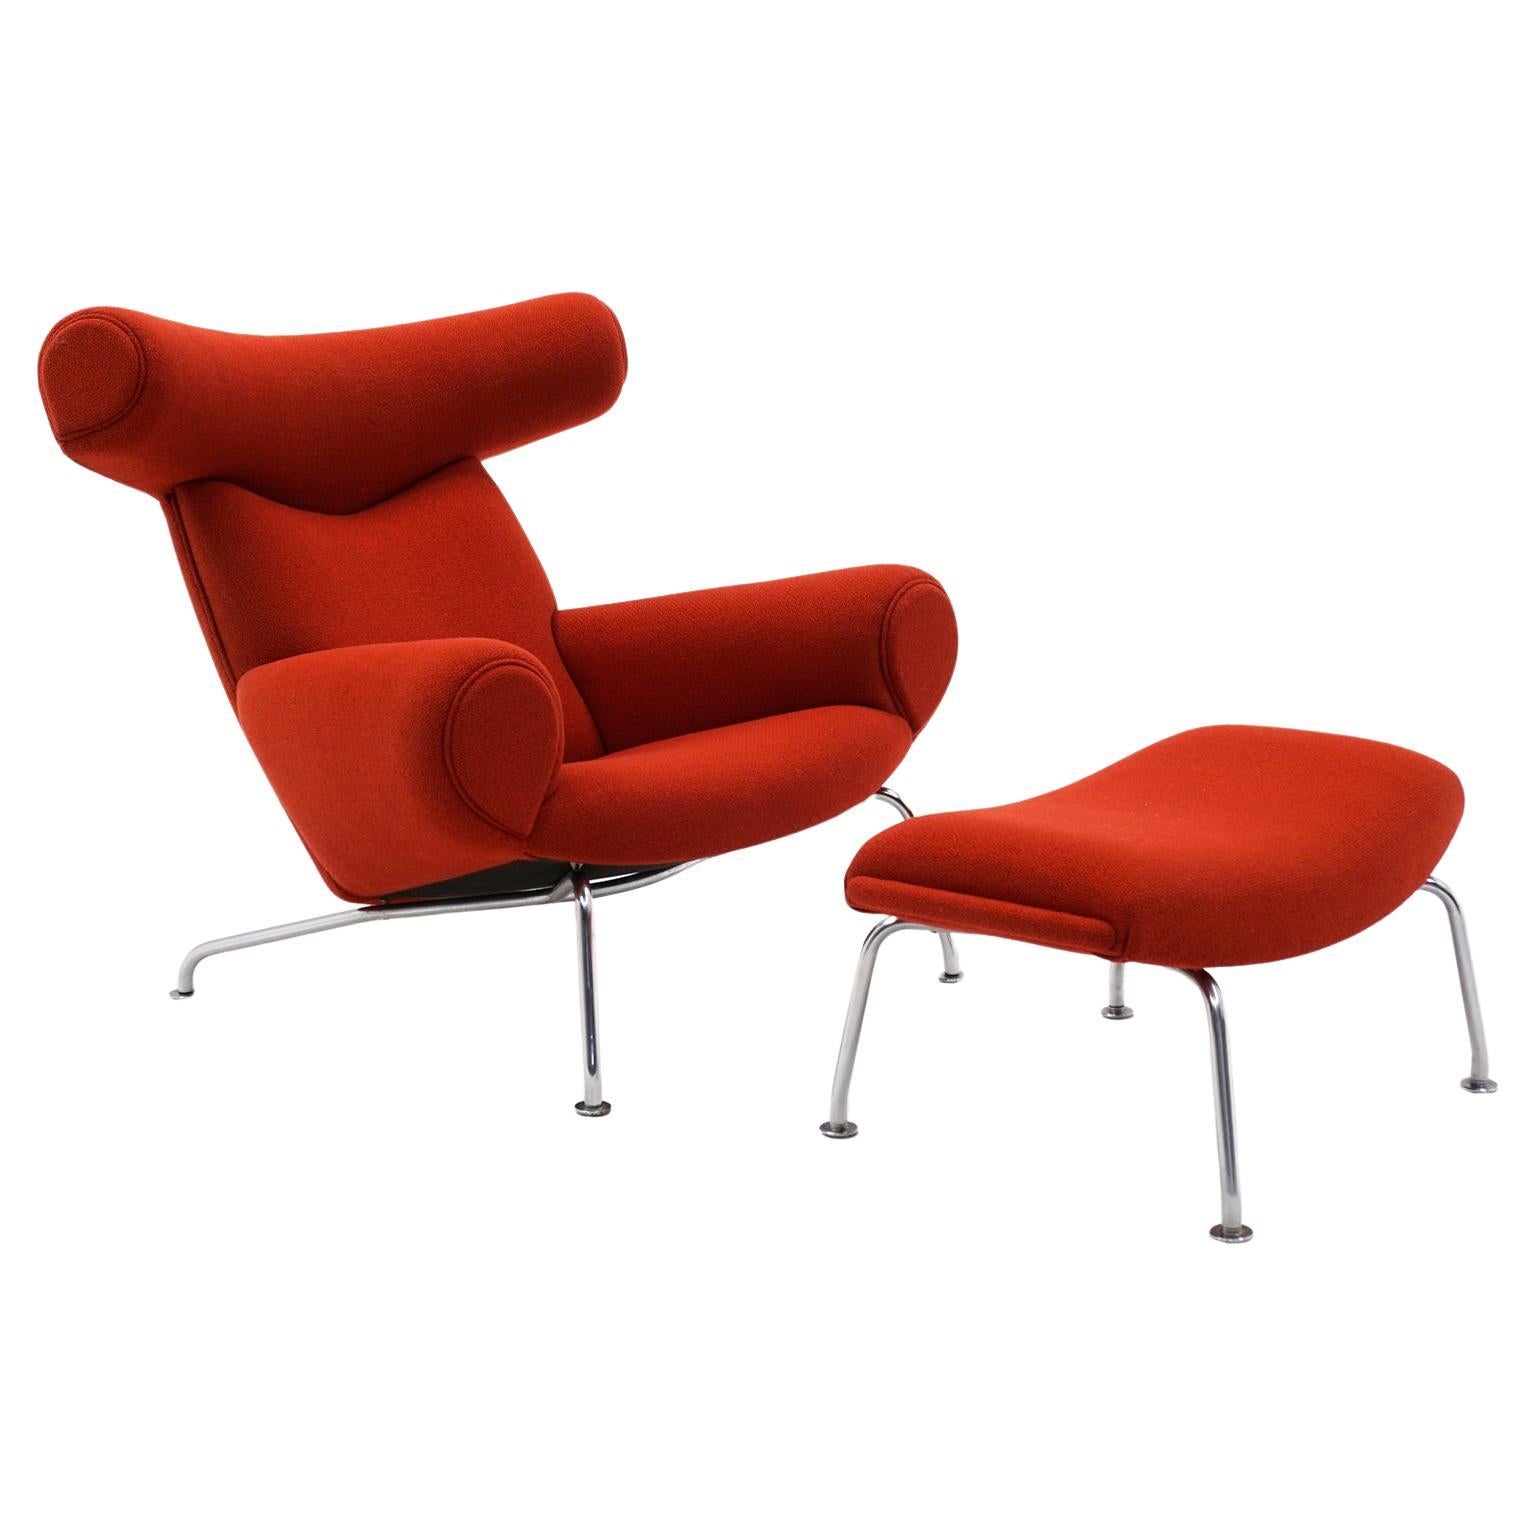 Ox Chair and Ottoman by Hans Wegner for A.P. Stolen. Red Fabric, Chrome Legs.